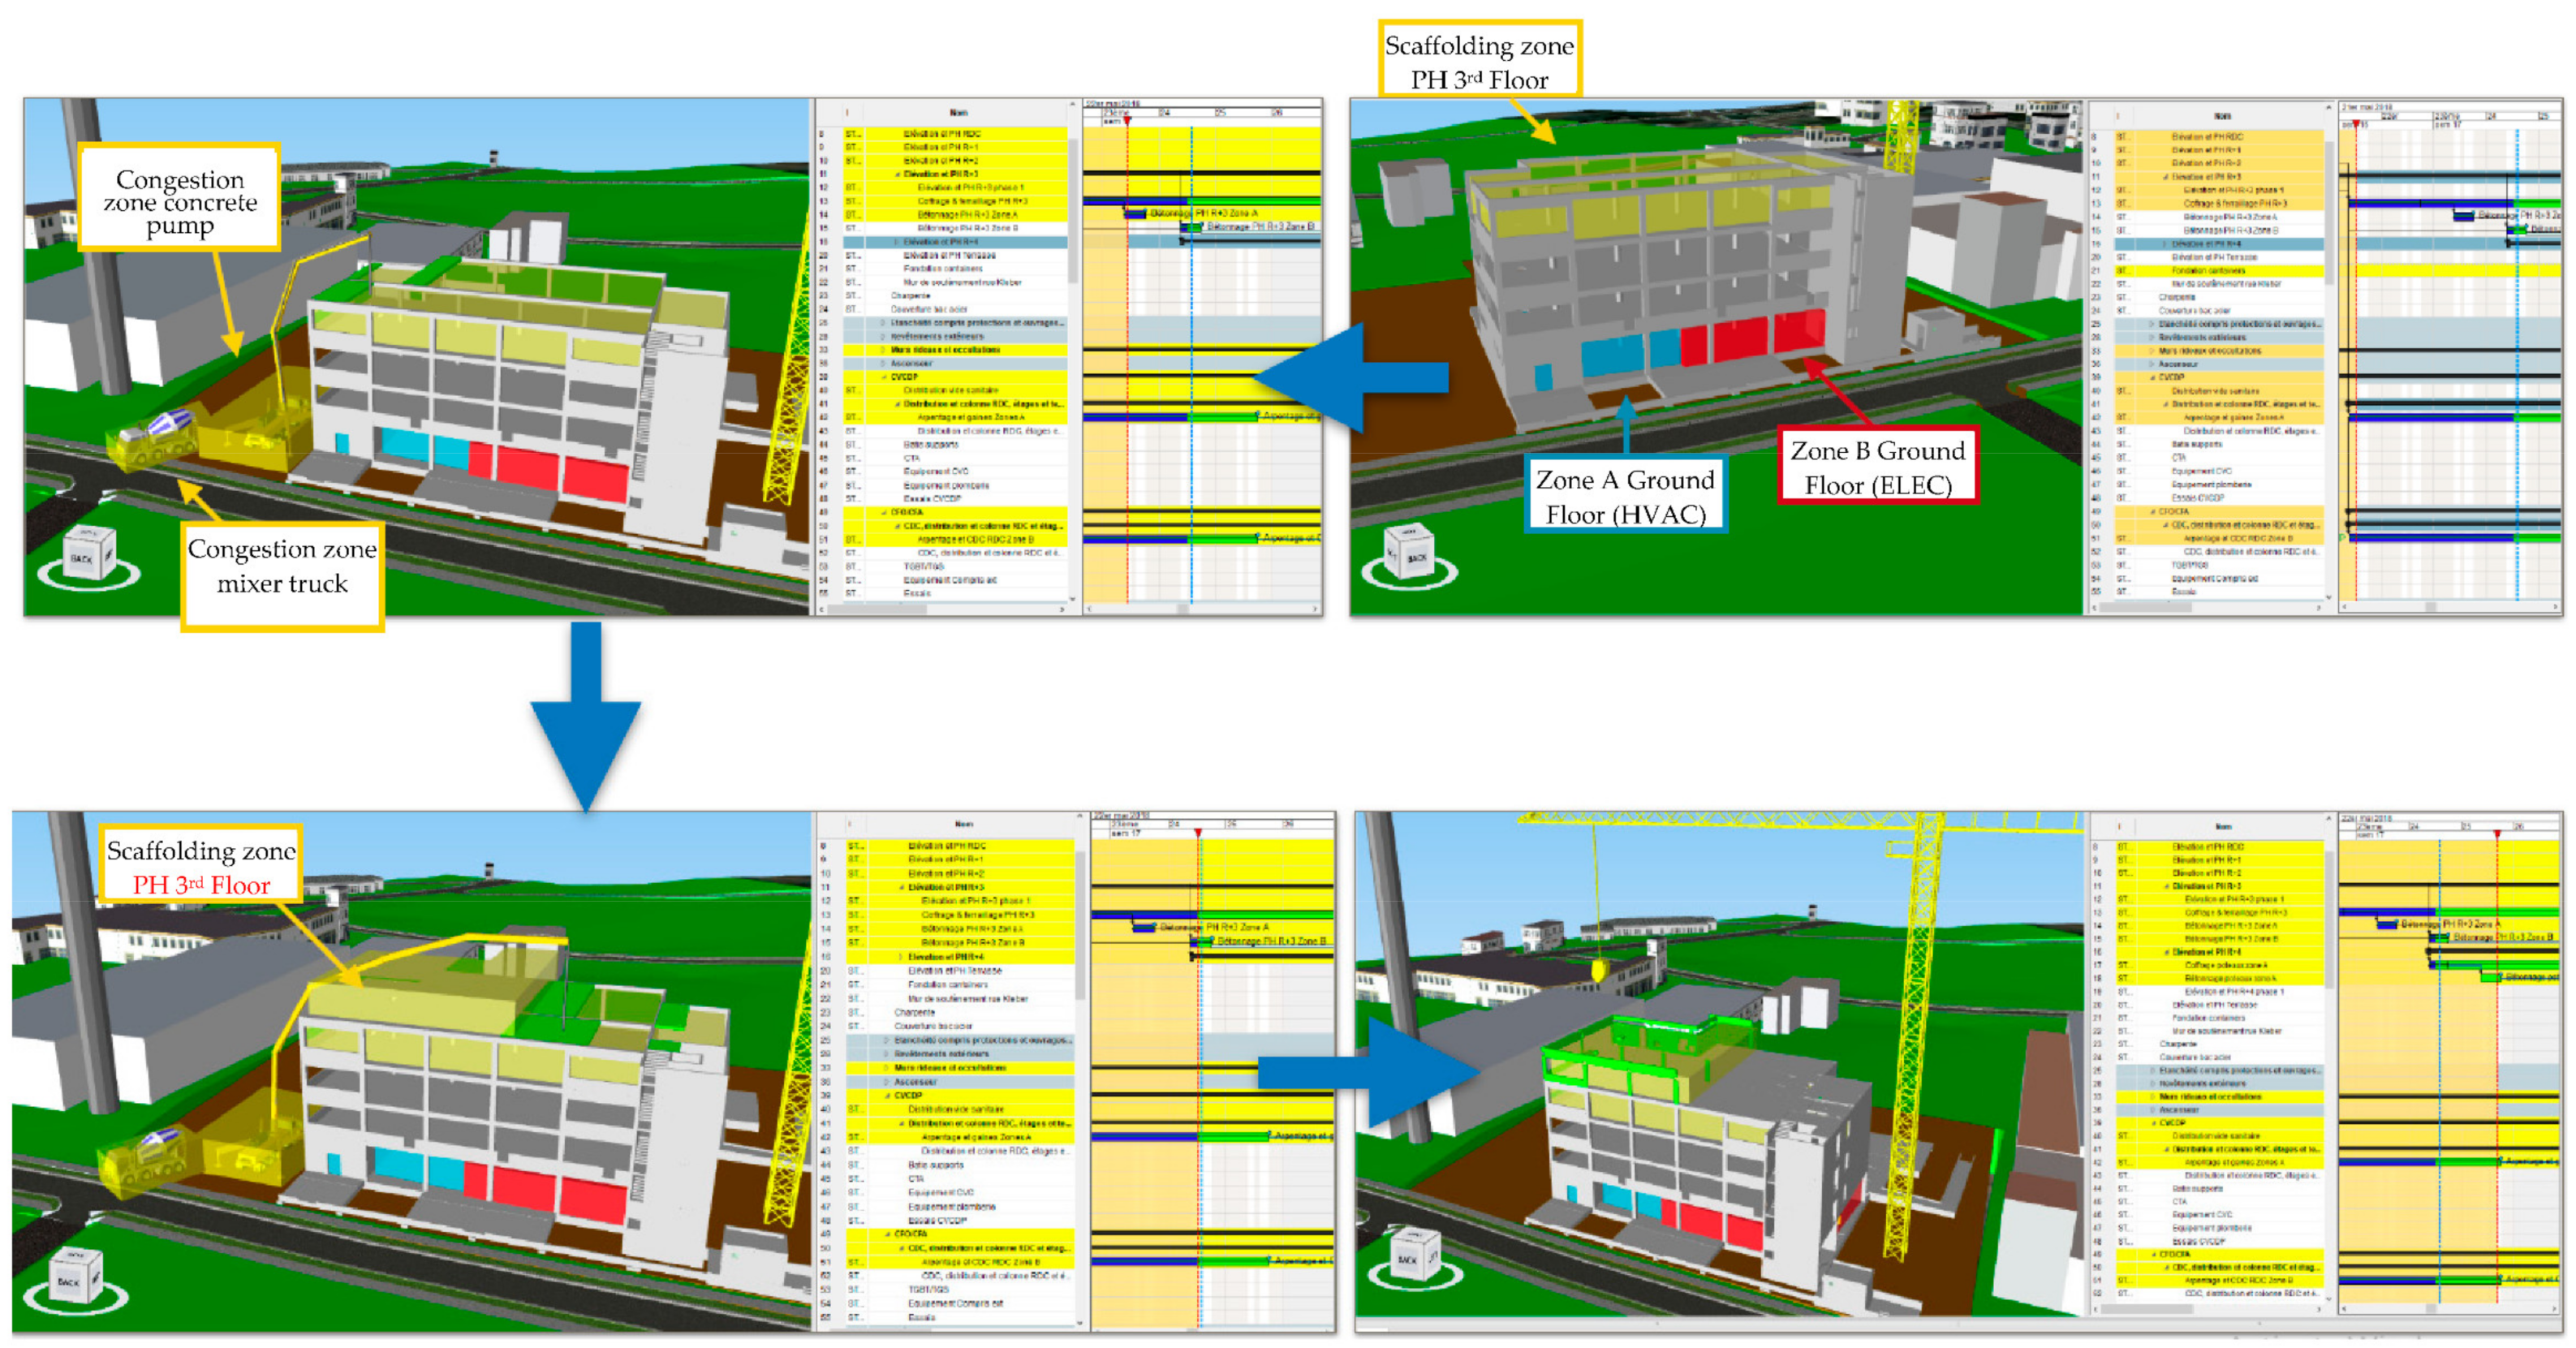 4D visualisation of the building process